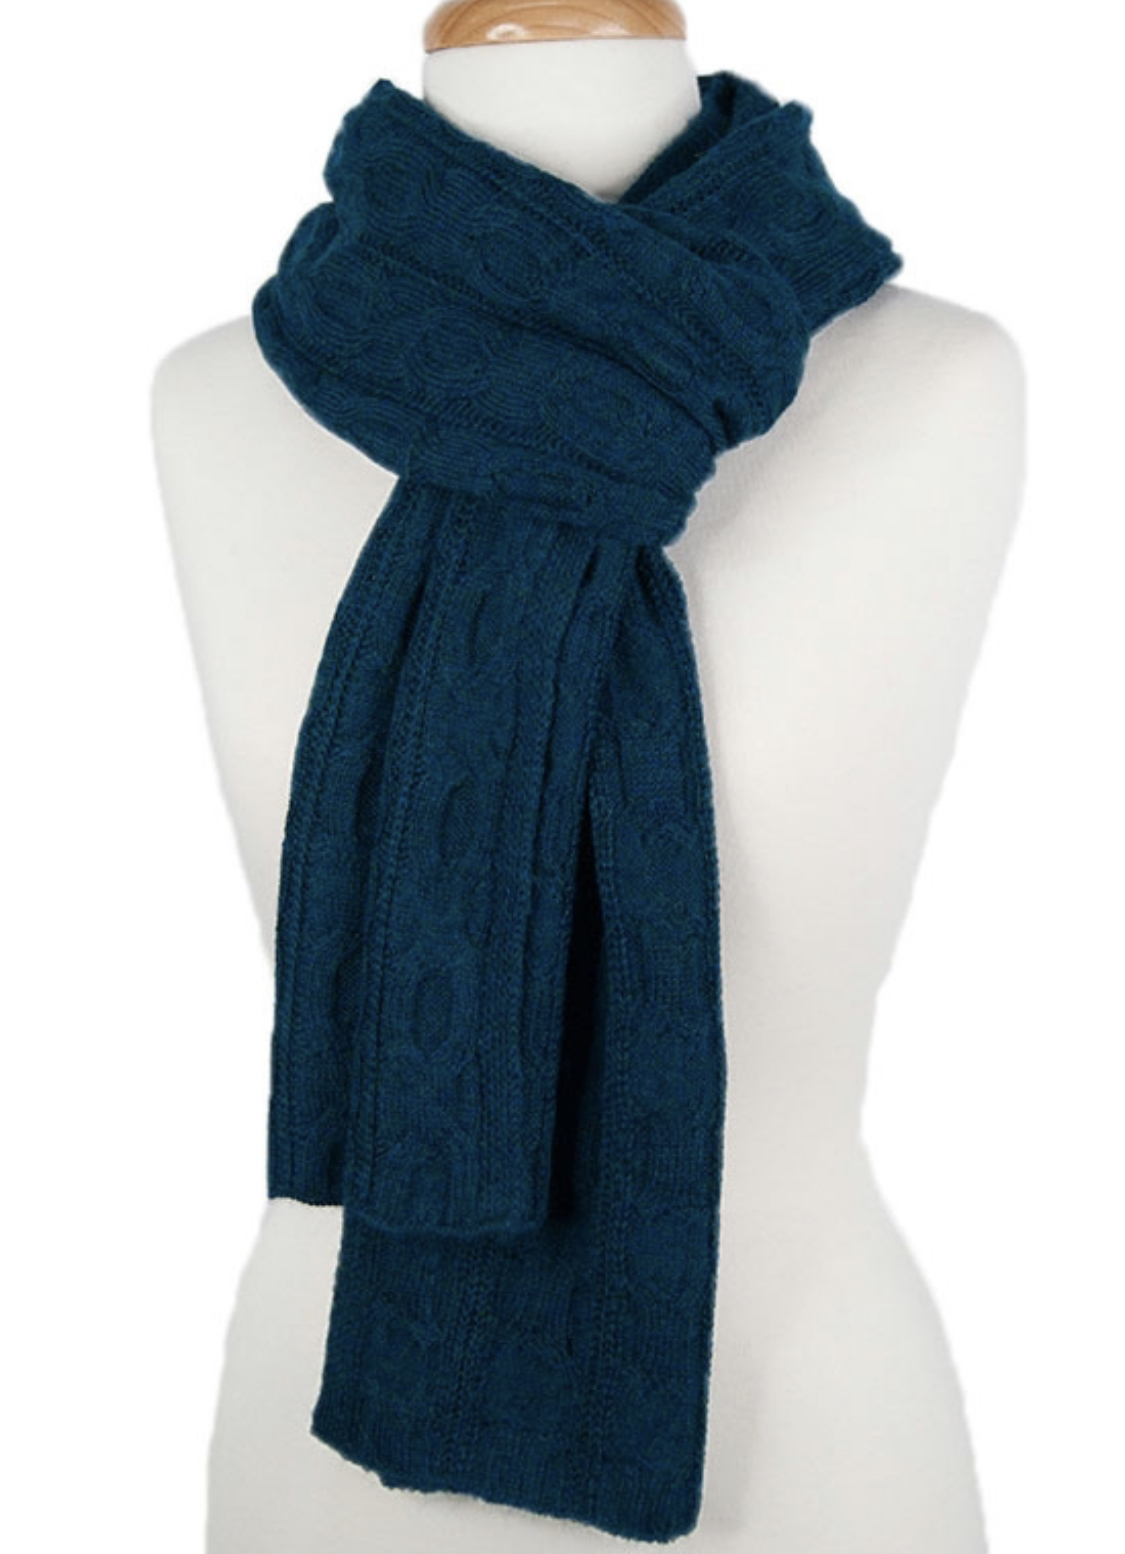 Amelia Knitted Cable Scarf Teal Blue - 1